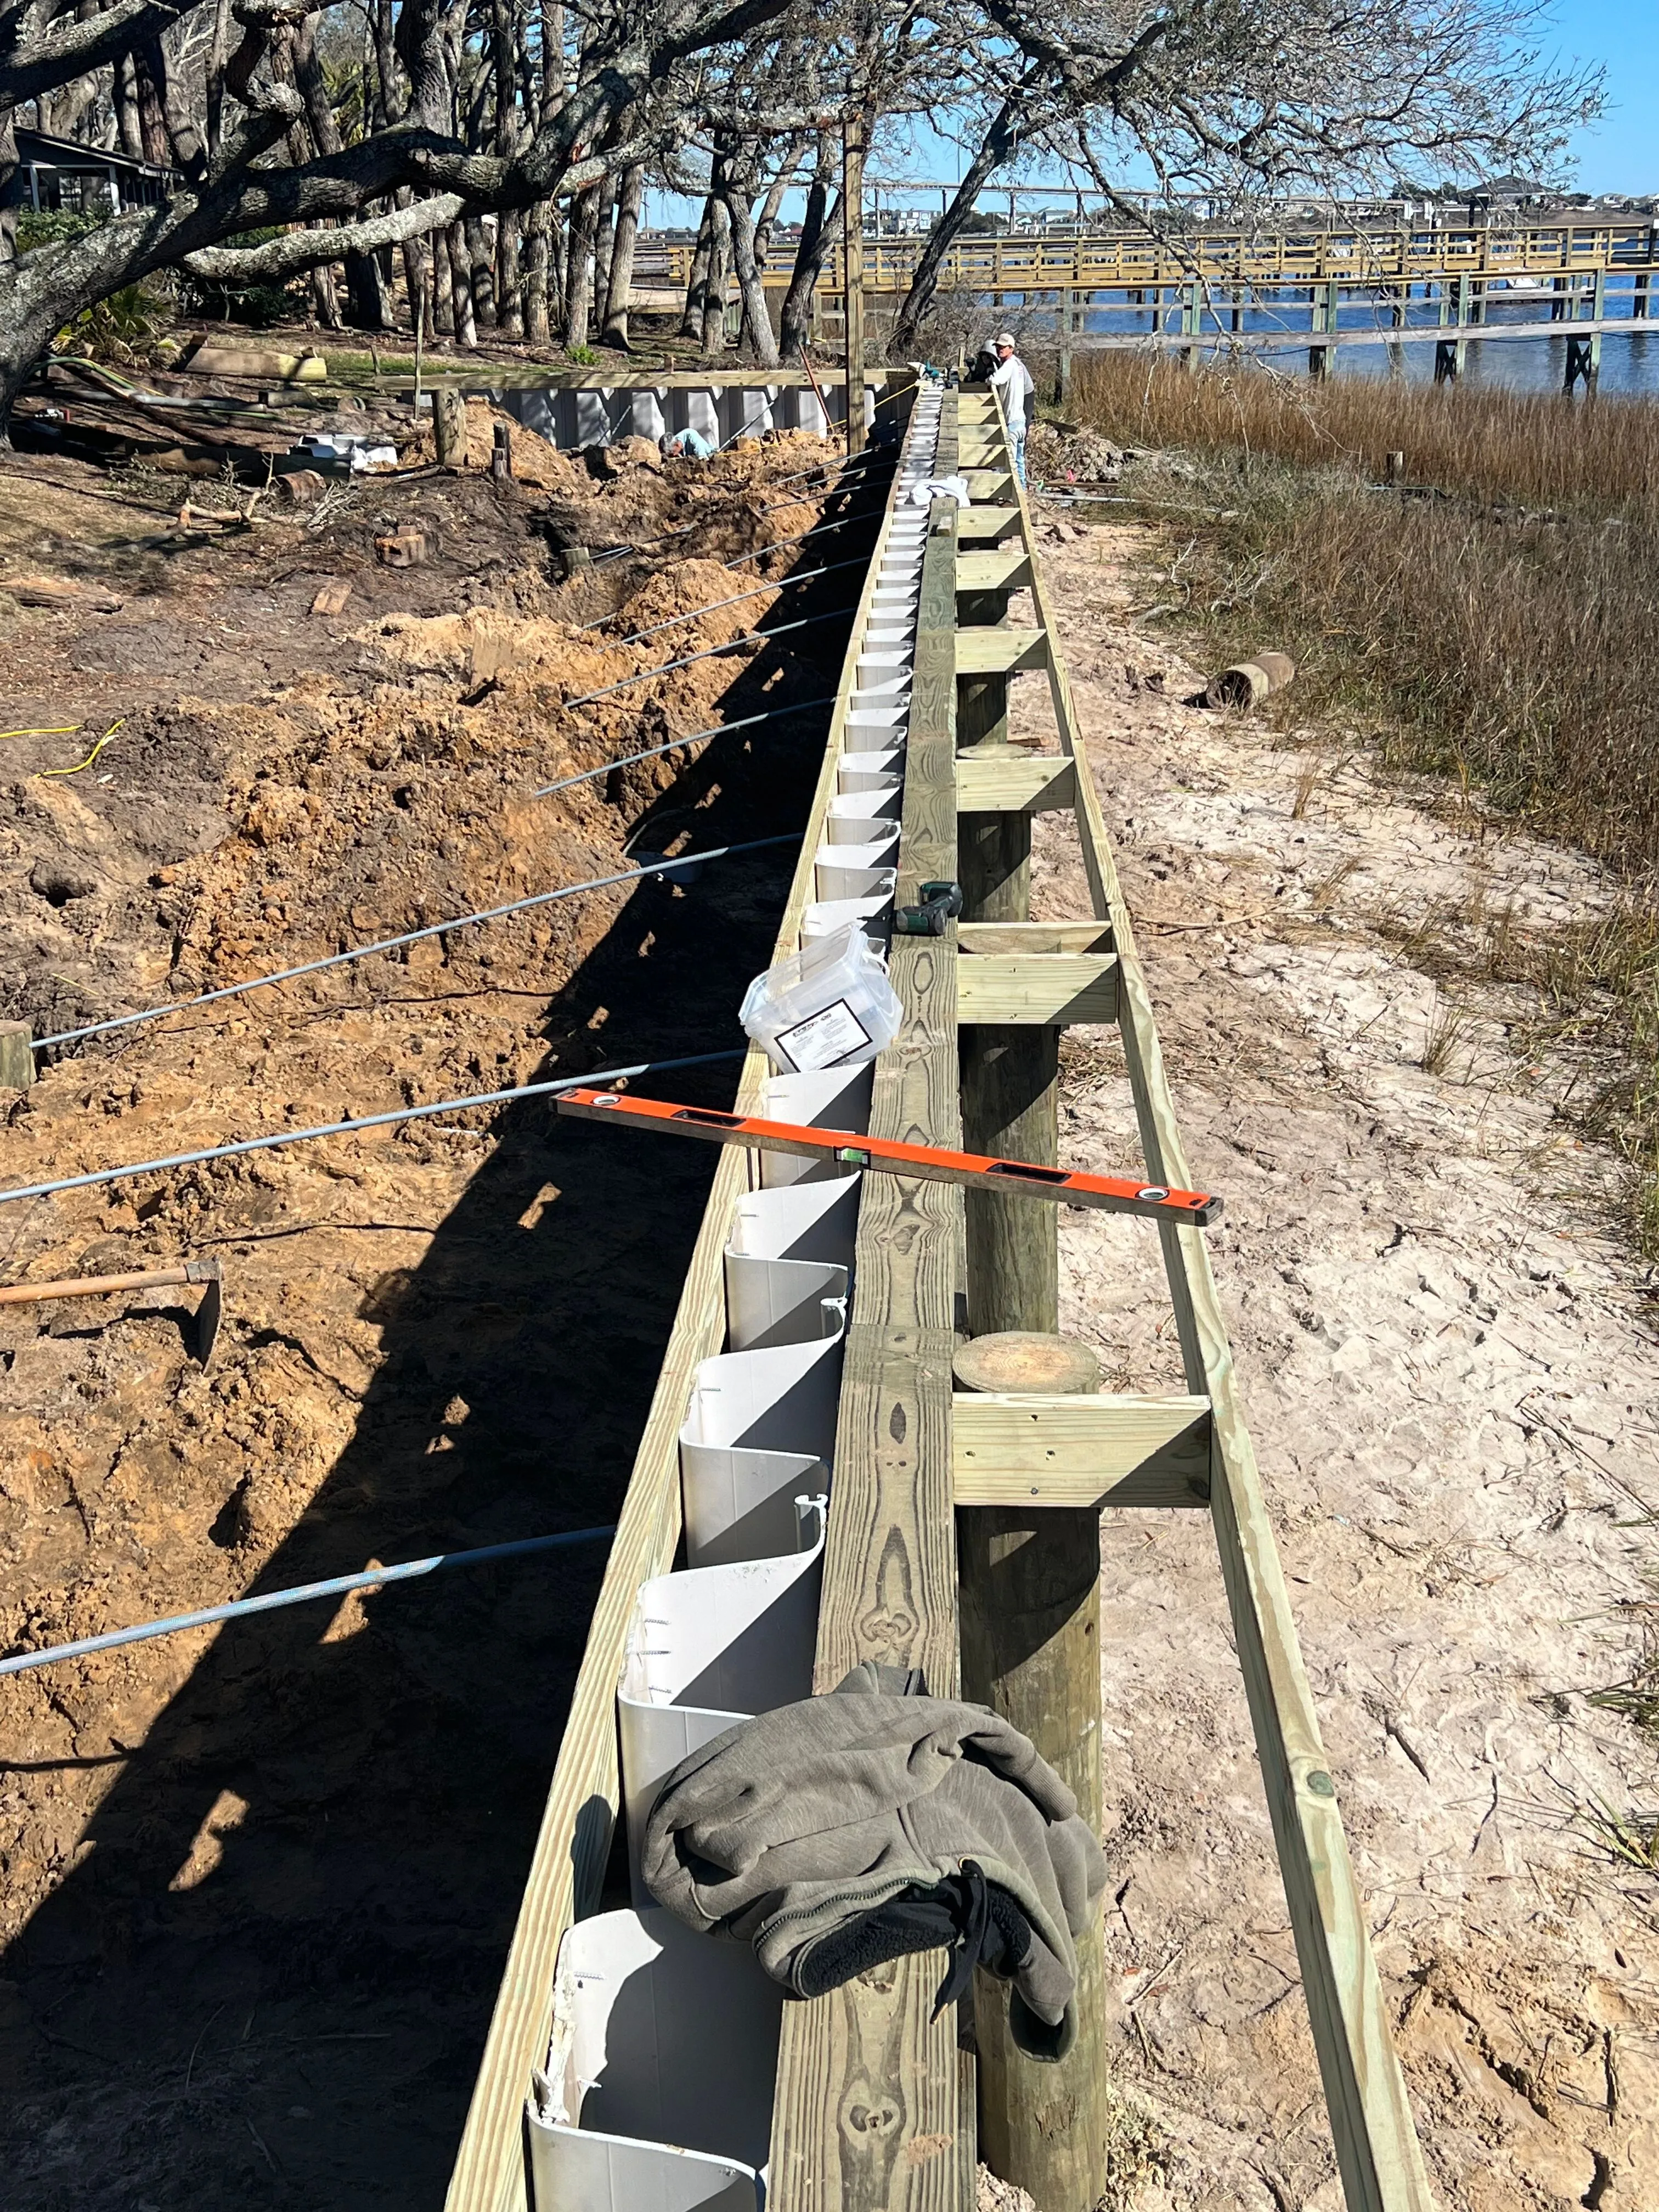 Vinyl Bulkhead framed out for composite wood cap under construction in Ocean Isle Beach NC on the Intracoastal Waterway built by Waterbridge Contractors of the Carolinas